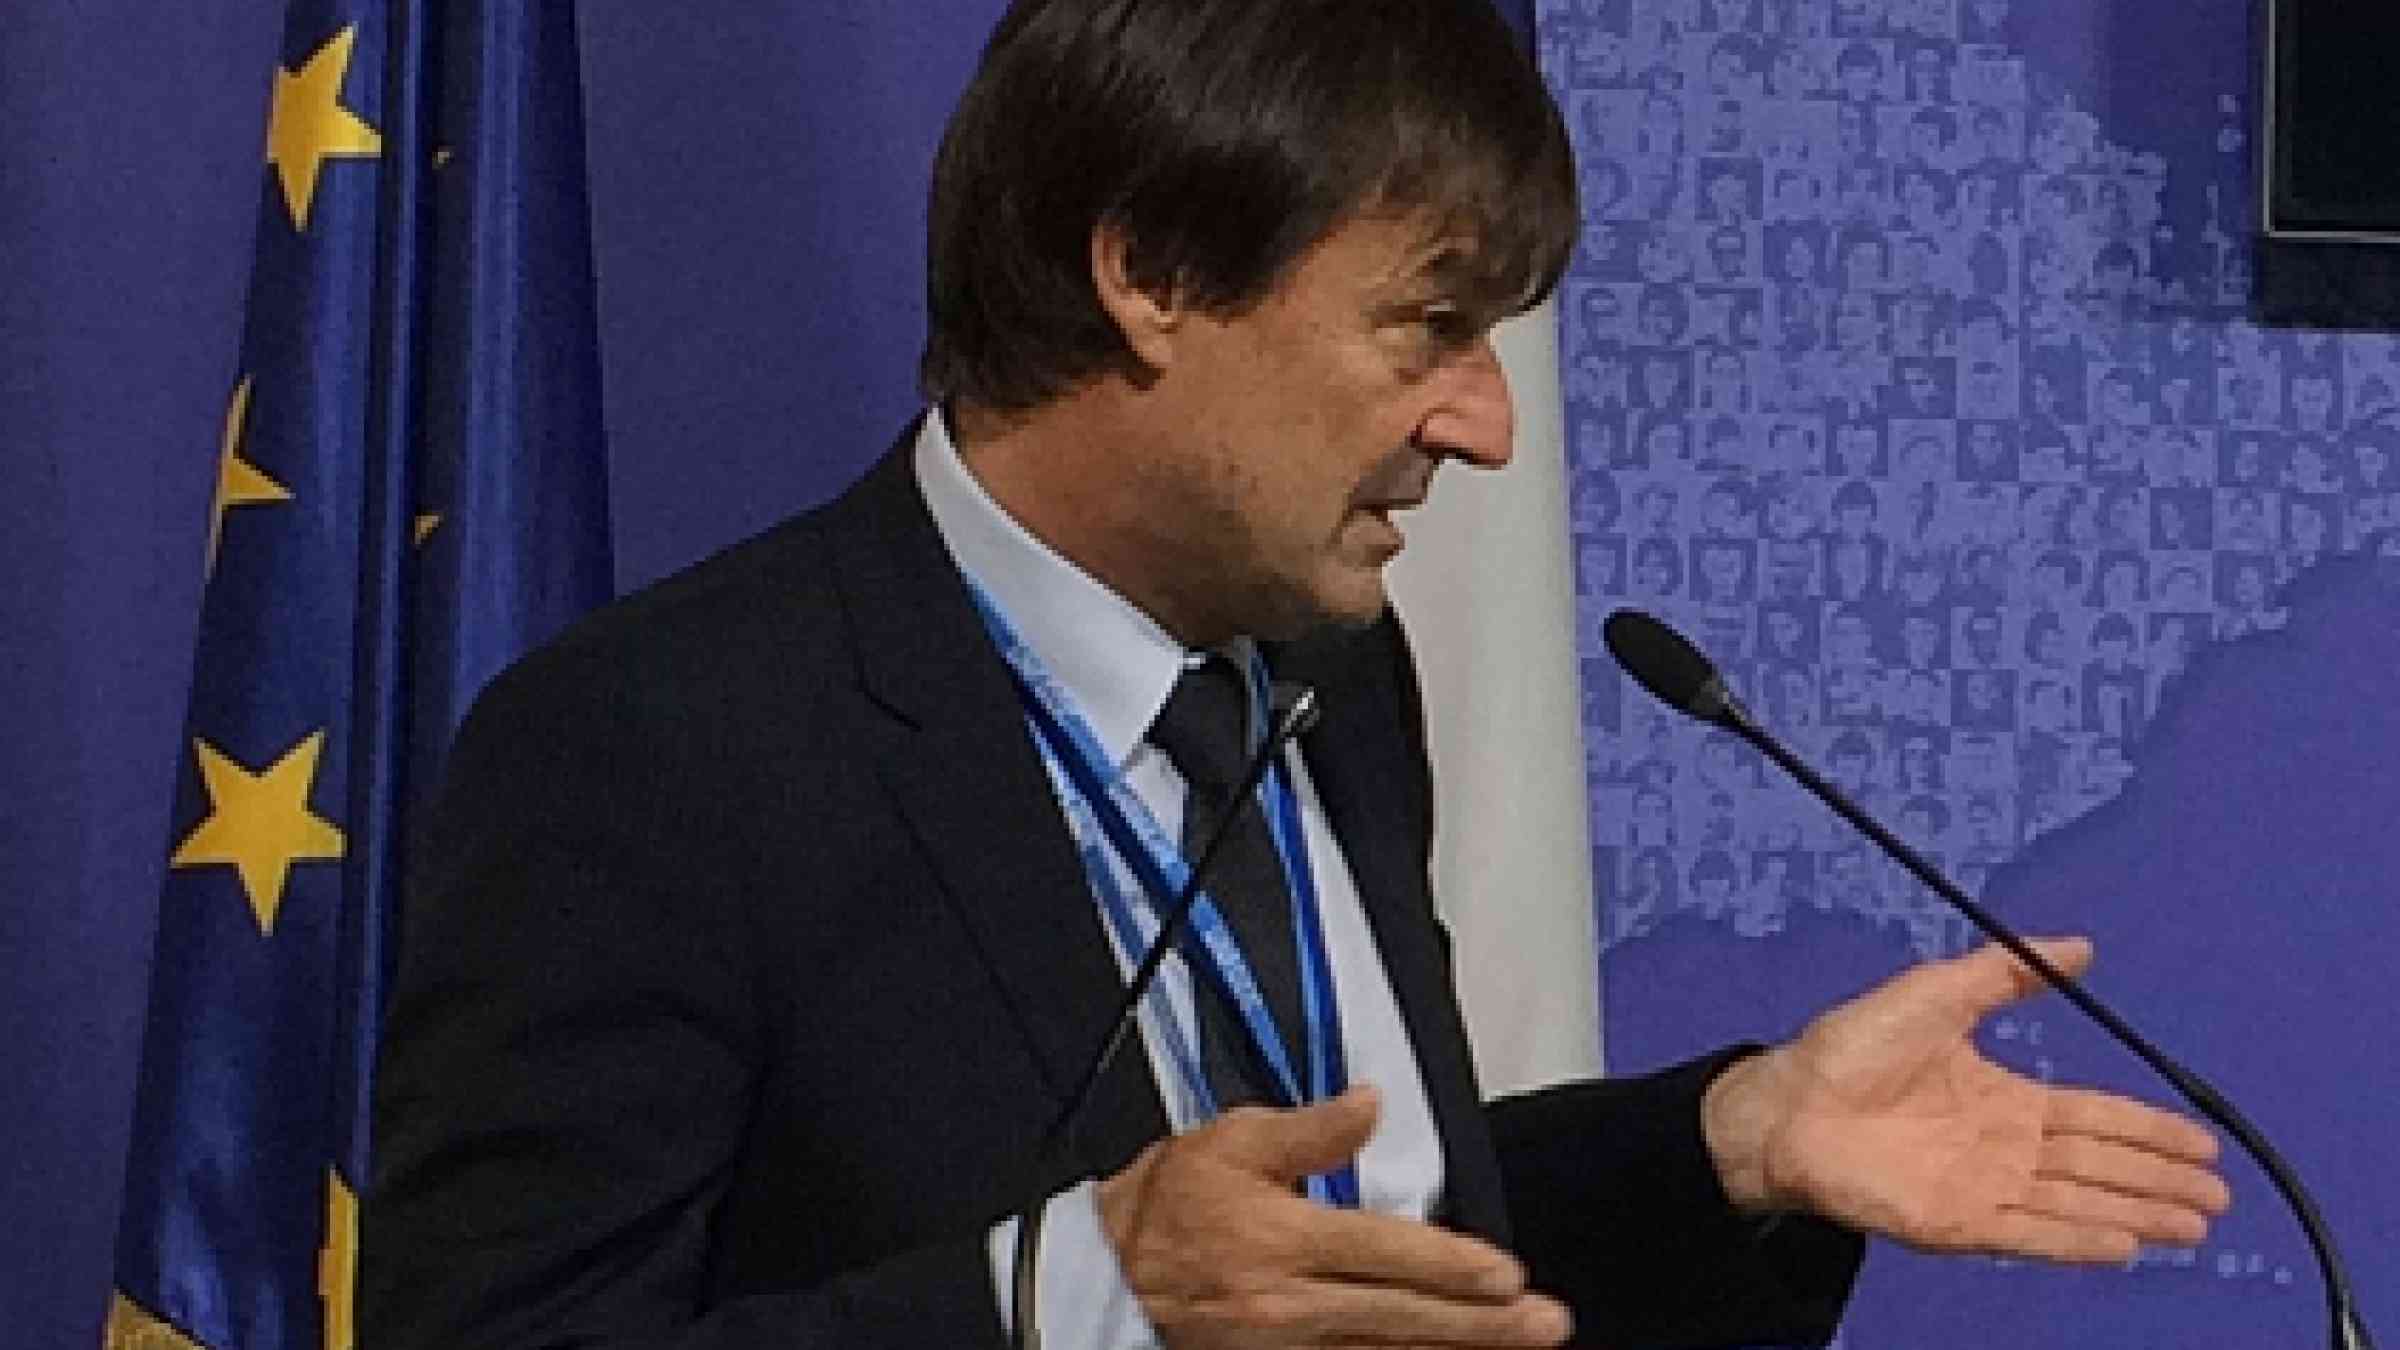 Mr. Nicolas Hulot, the French Minister for Ecology, called for increased support to the Climate Risk and Early Warning Systems initiative at COP23